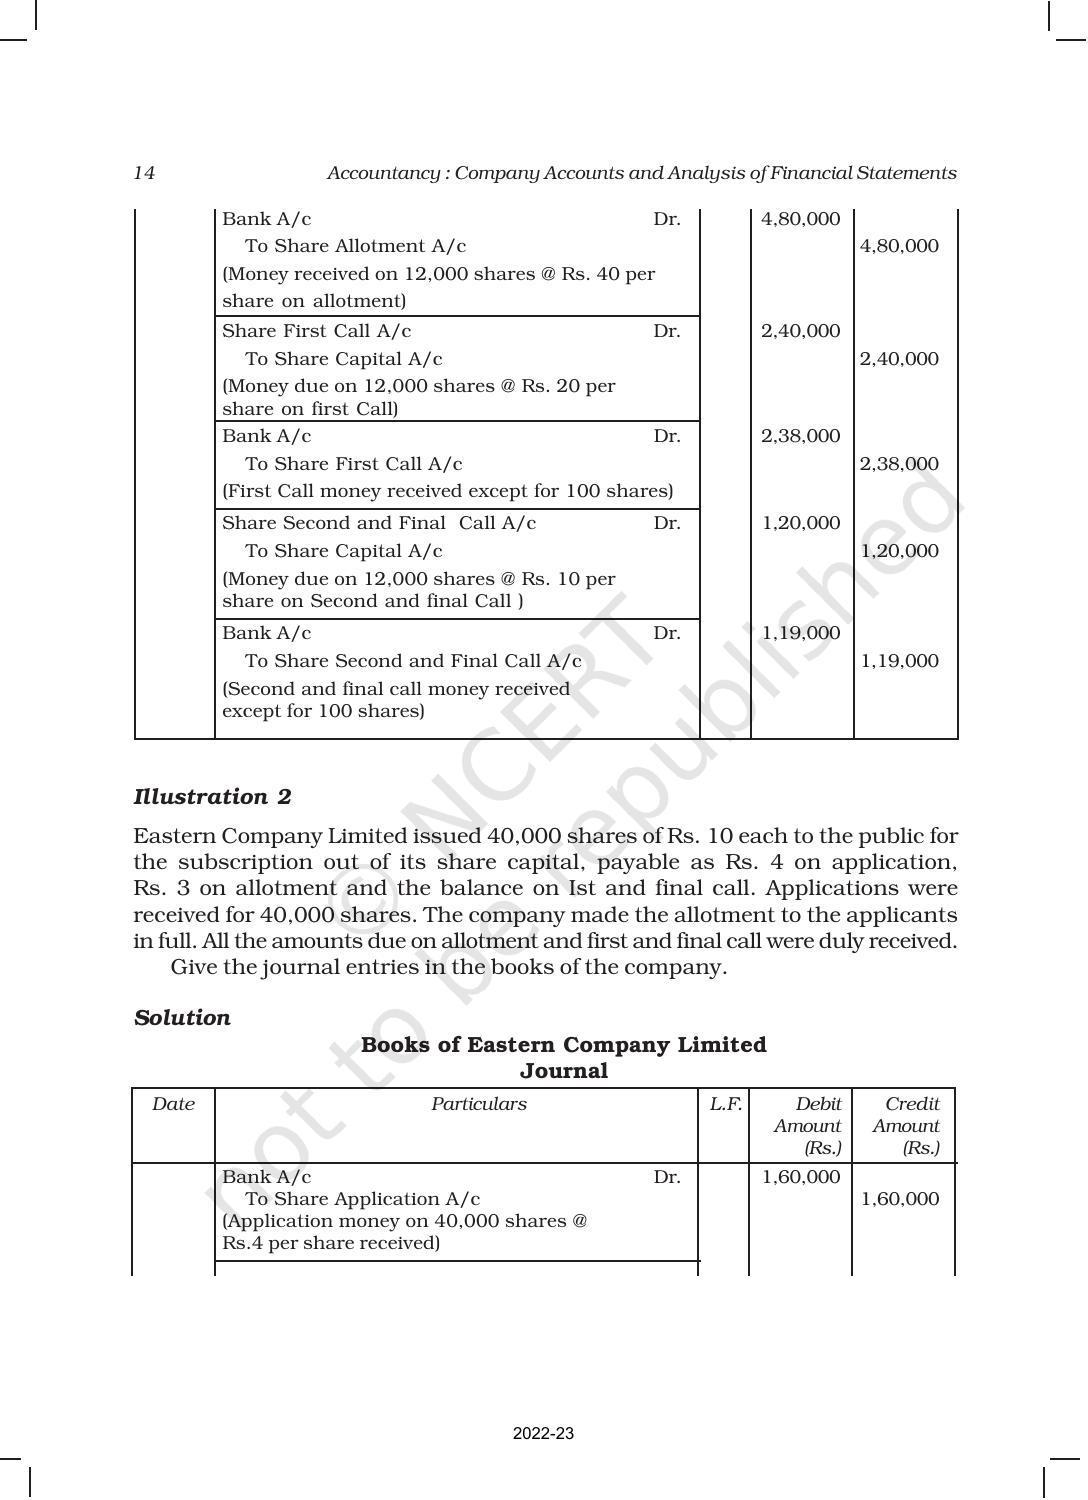 NCERT Book for Class 12 Accountancy Part II Chapter 1 Accounting for Share Capital - Page 14